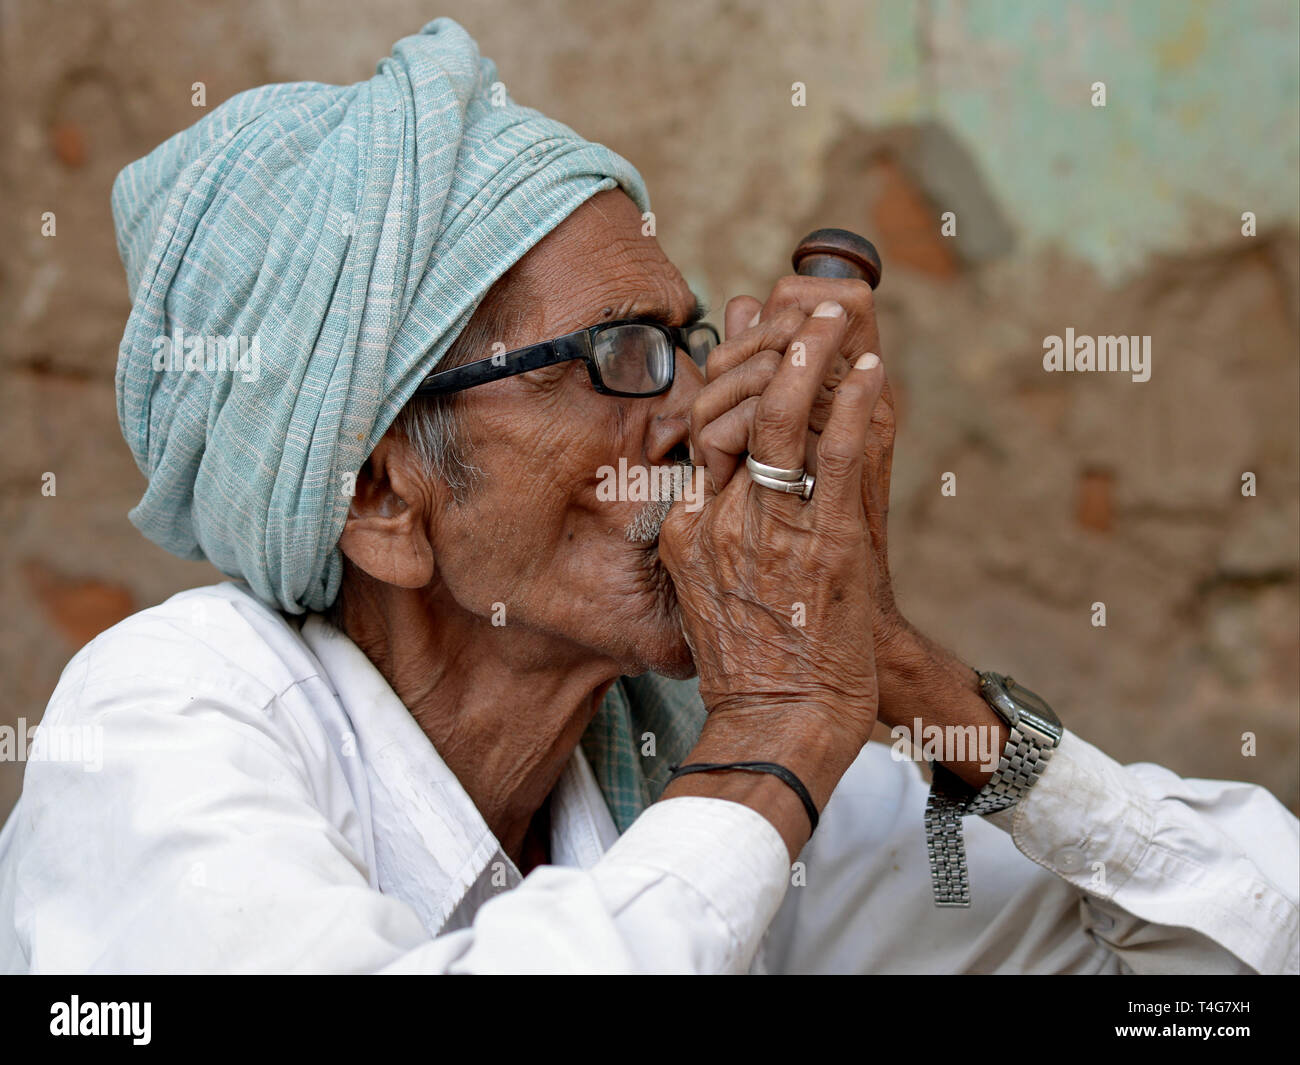 Old Indian Rajasthani man smokes tobacco in his chillum pipe. Stock Photo